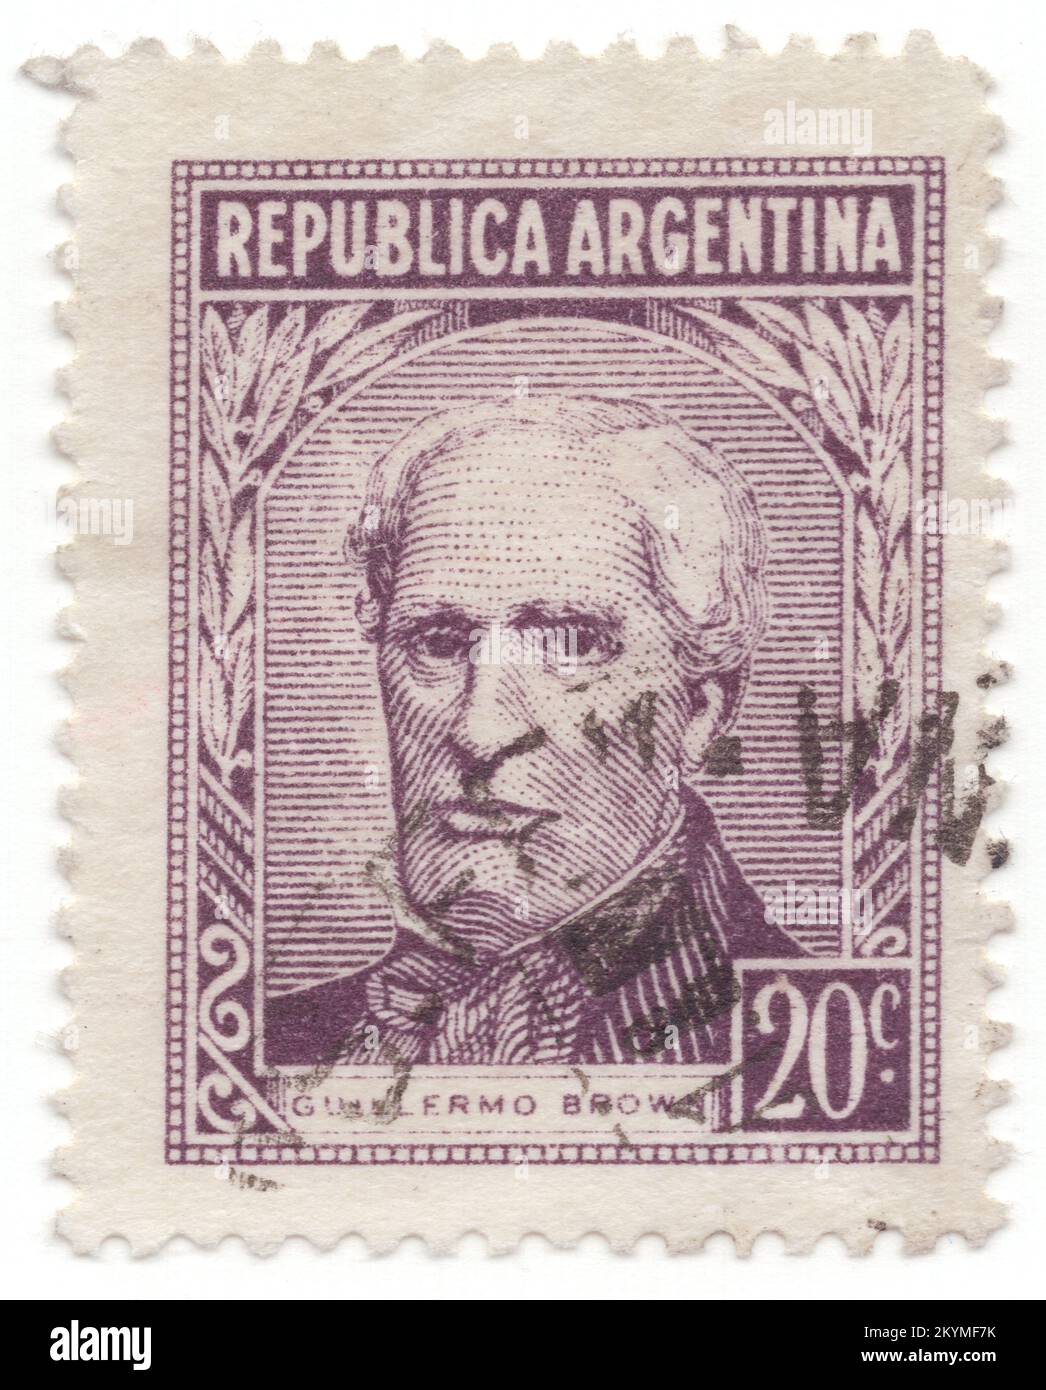 ARGENTINA - 1956: 20 centavos dull purple postage stamp depicting portrait of Admiral Brown. William Brown (also known in Spanish as Guillermo Brown or Almirante Brown) was an Irish-born Argentine admiral. Brown's successes in the Argentine War of Independence, the Cisplatine War and the Anglo-French blockade of the Río de la Plata earned the respect and appreciation of the Argentine people, and he is regarded as one of Argentina's national heroes. Creator and first admiral of the country's maritime forces, he is commonly known as the 'father of the Argentine Navy' Stock Photo